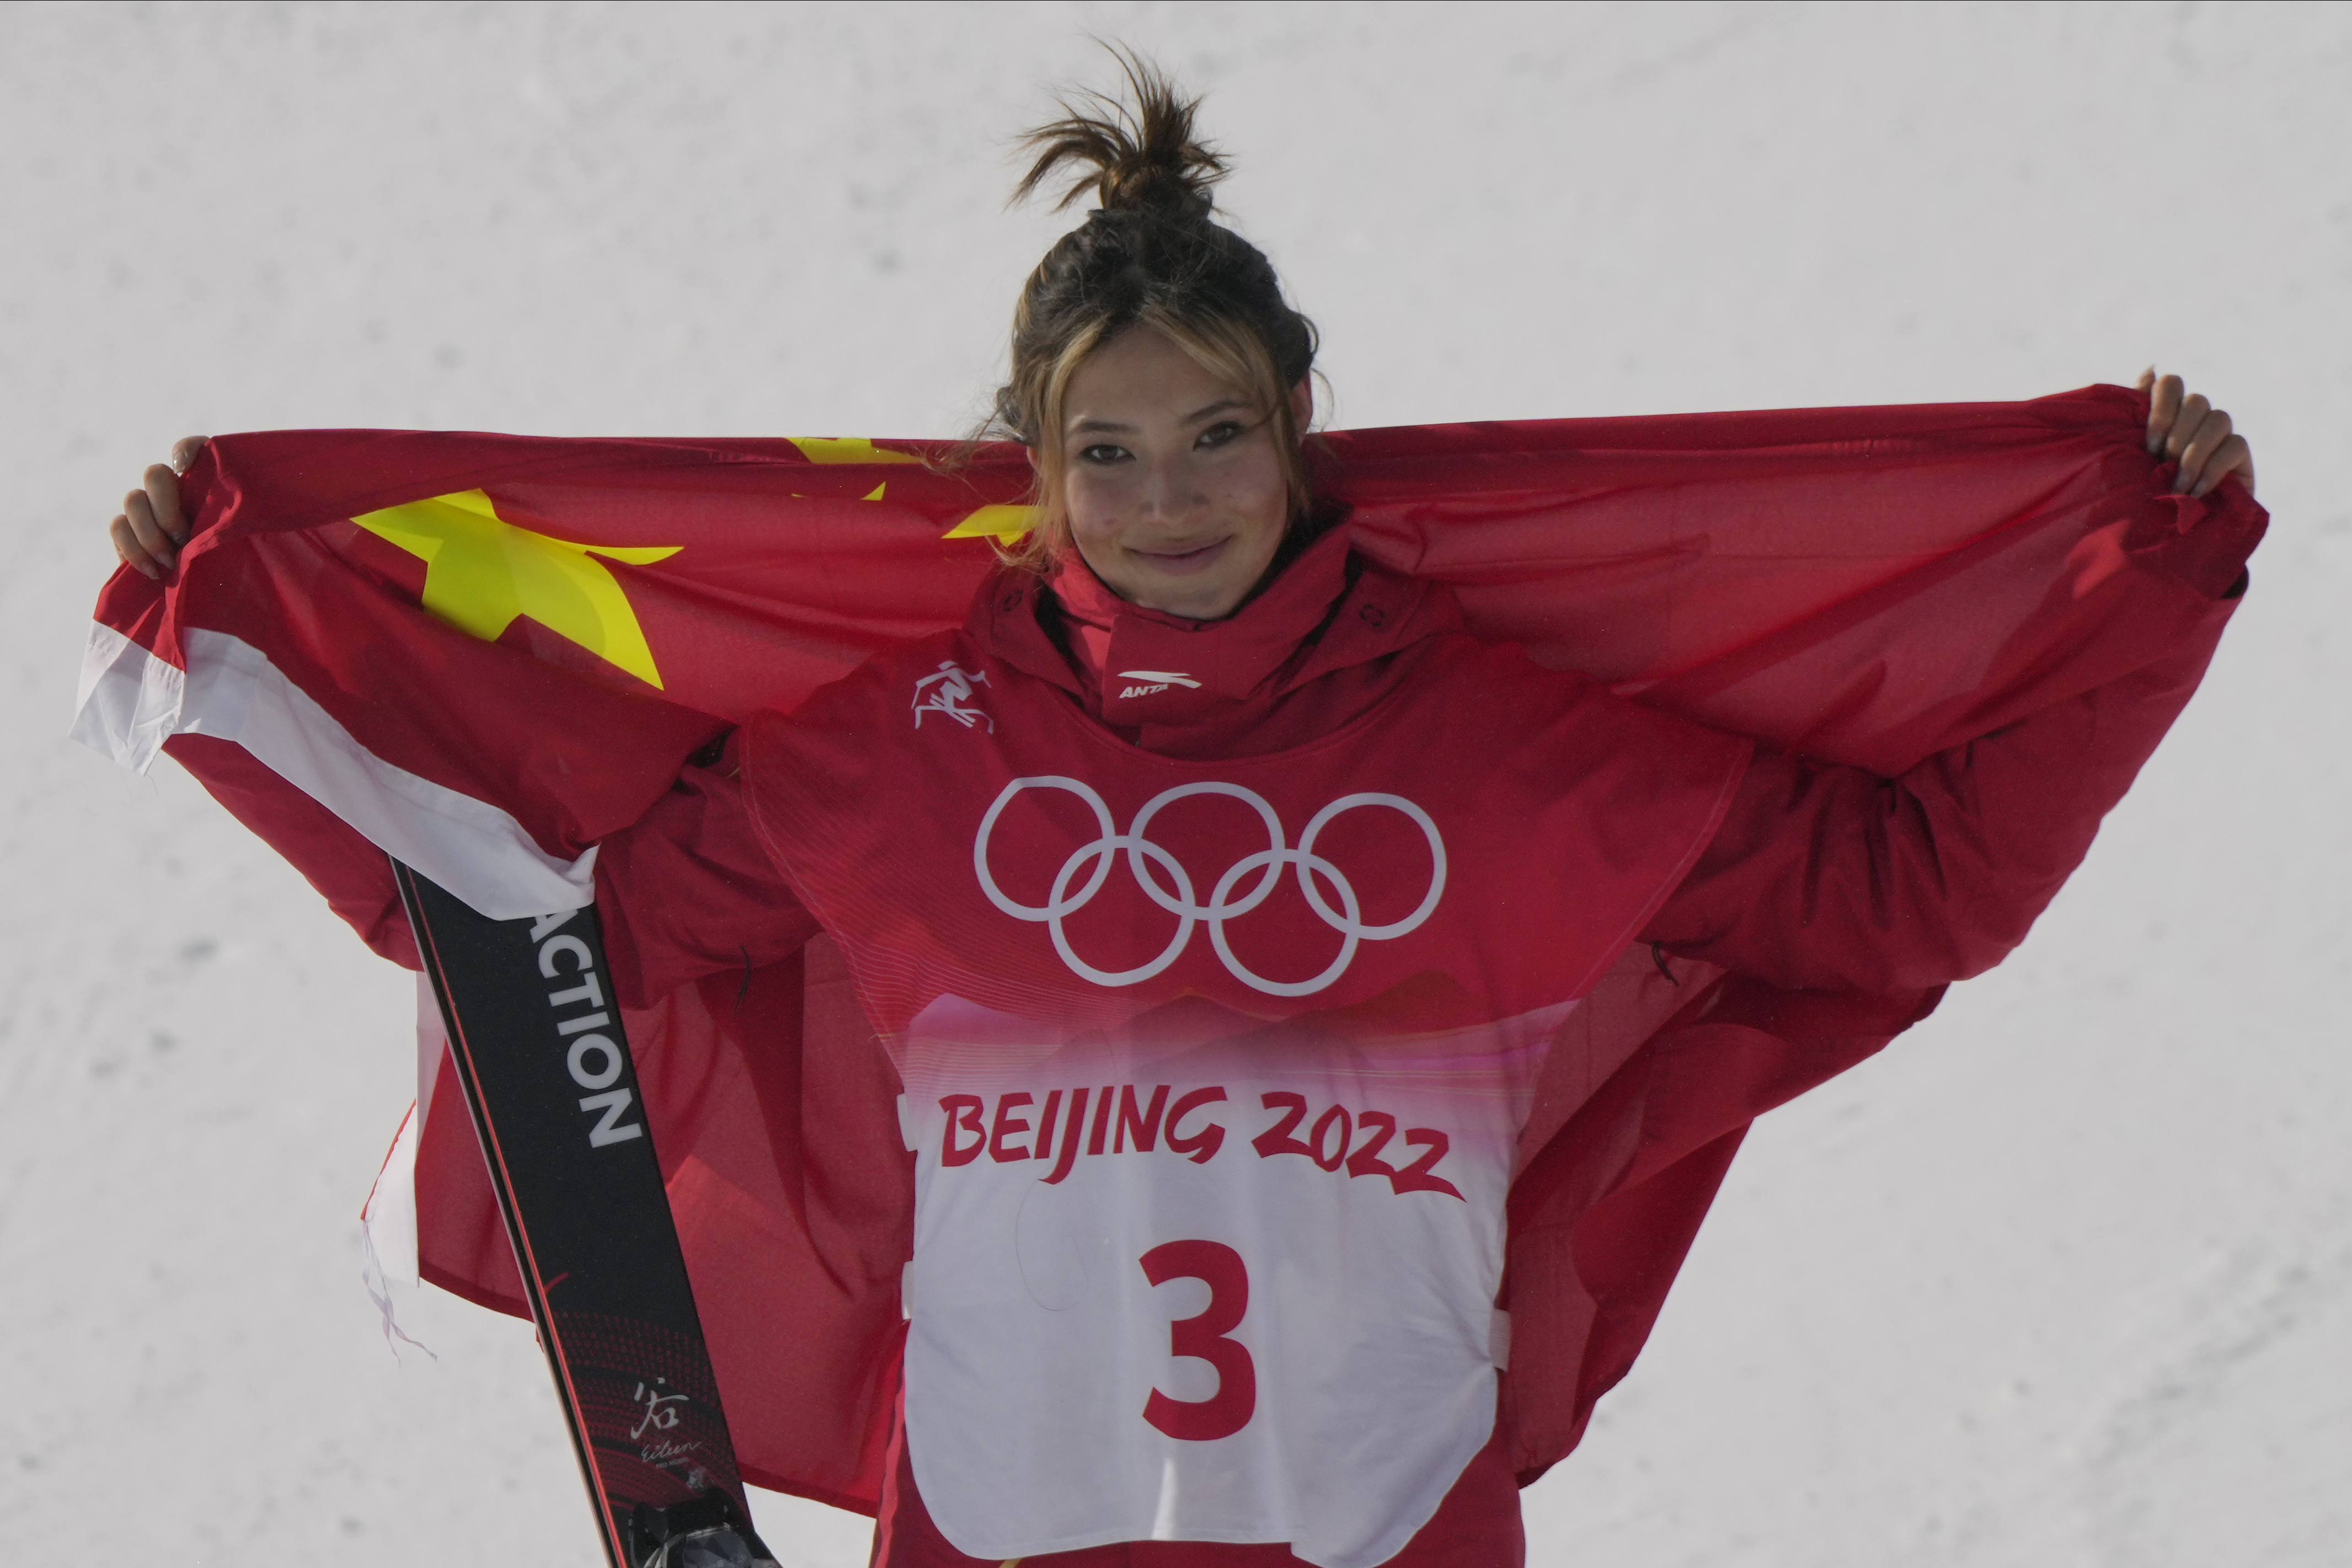 Eileen Gu Facts Like Being The Winter Olympics 2022 Gold Medalist